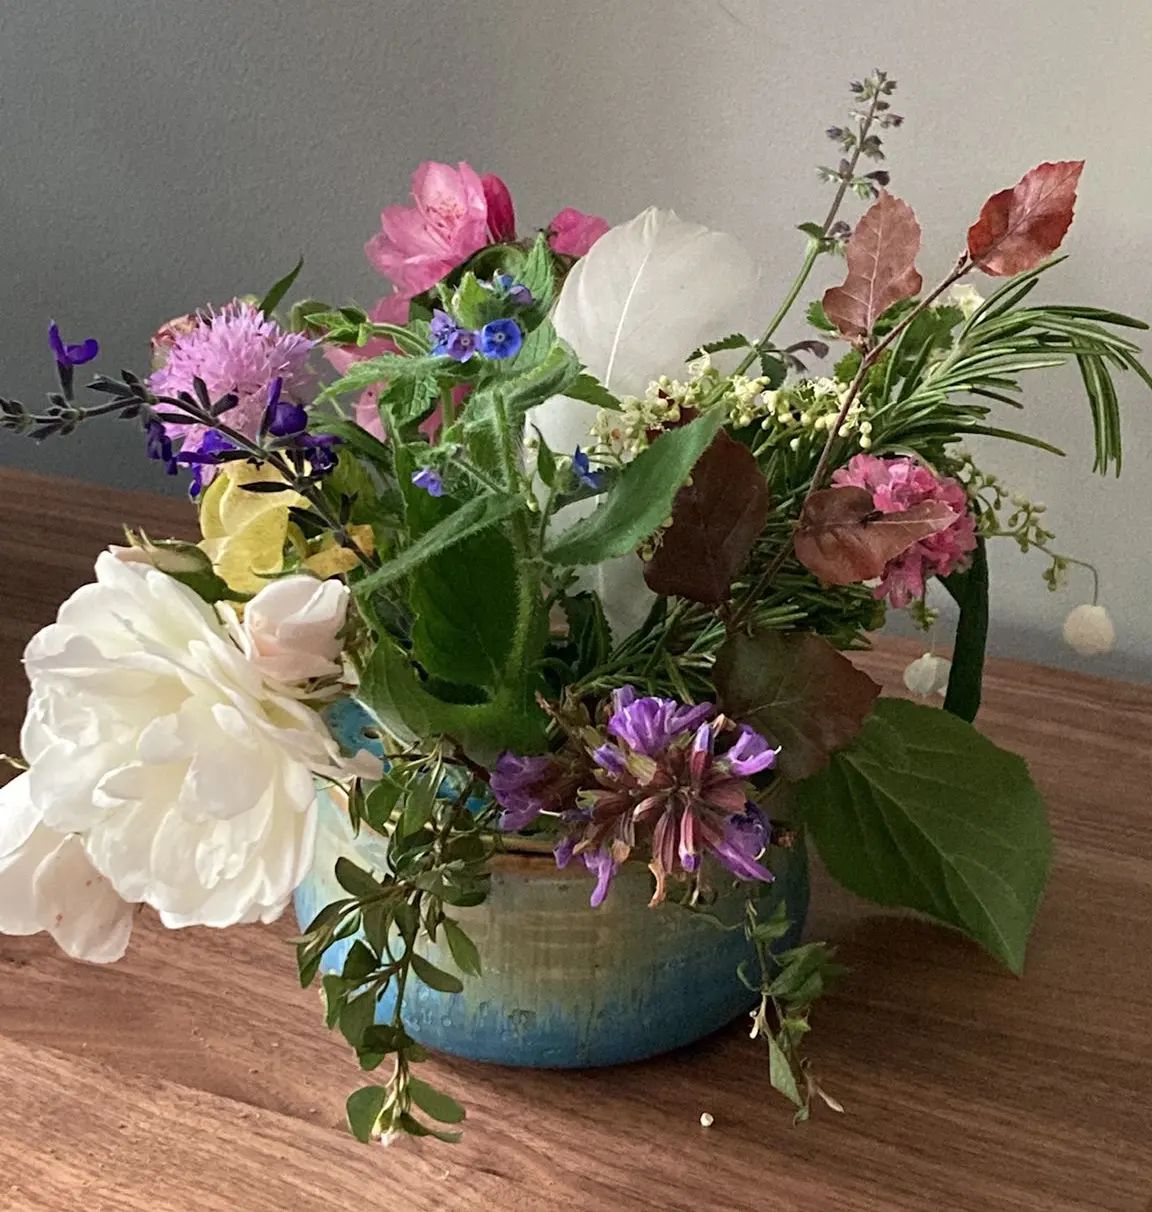 Flower frog arrangement by a customer. Love the white feather!!!

This flower frog can be used as chawan and the top as soap dish. You can also burn insence cones in it. Love multi purpose items! 

#flowers #flowerarrangement #spring #flowerfrog #chawan #soapdish #ceramics #keramiek #keramik #keramikk #ceramique #multipurpose #handmade #wheelthrown #clay #stoneware #handcrafted #craft #craftmanship #handgemacht #ceramicsstudio #lifestyle #interiordesign #homedecor #homedecoration #pottery